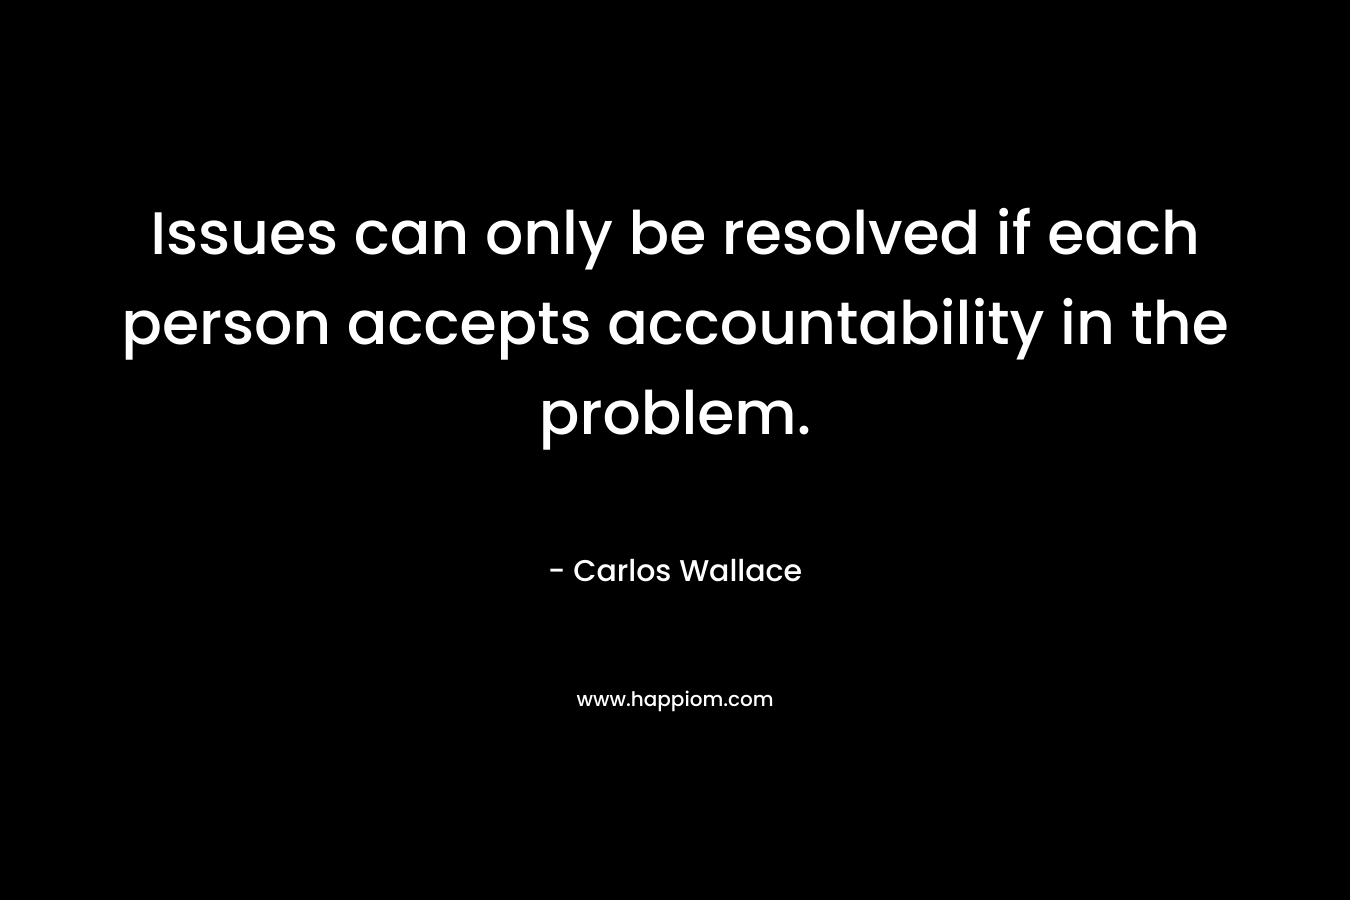 Issues can only be resolved if each person accepts accountability in the problem.